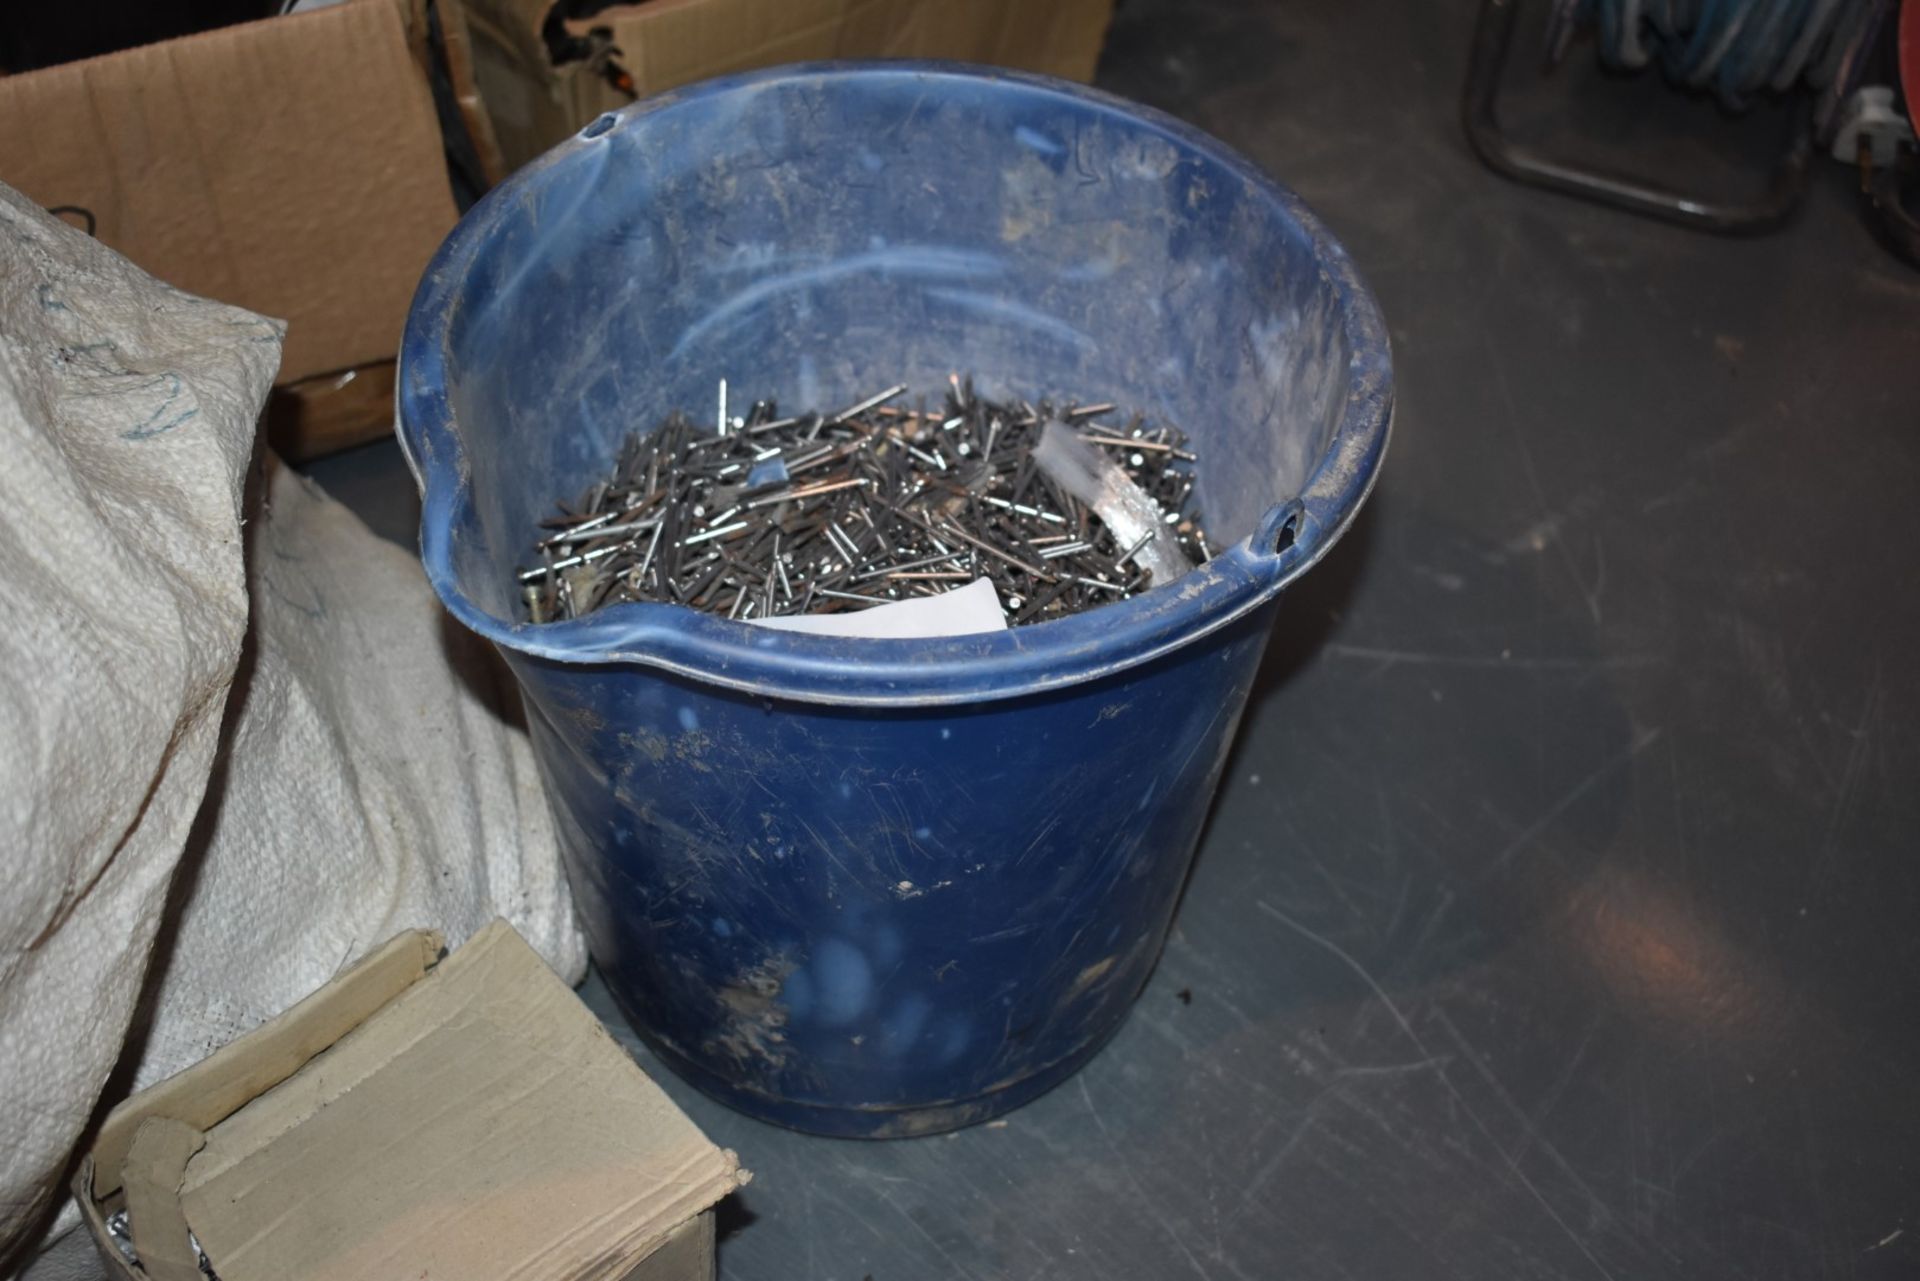 1 x Large Collection of Nails - Includes Large Sack, Box and Bucket Filled With Various Sized - Image 5 of 5